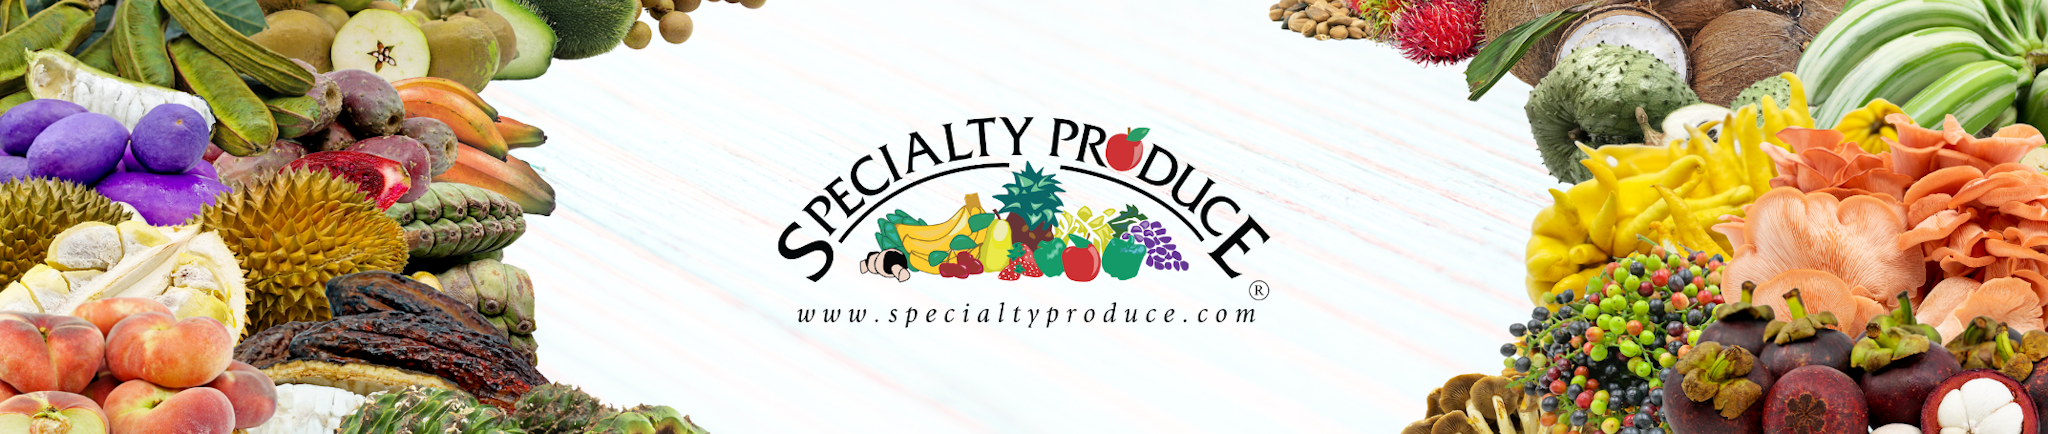 Specialty Produce's banner